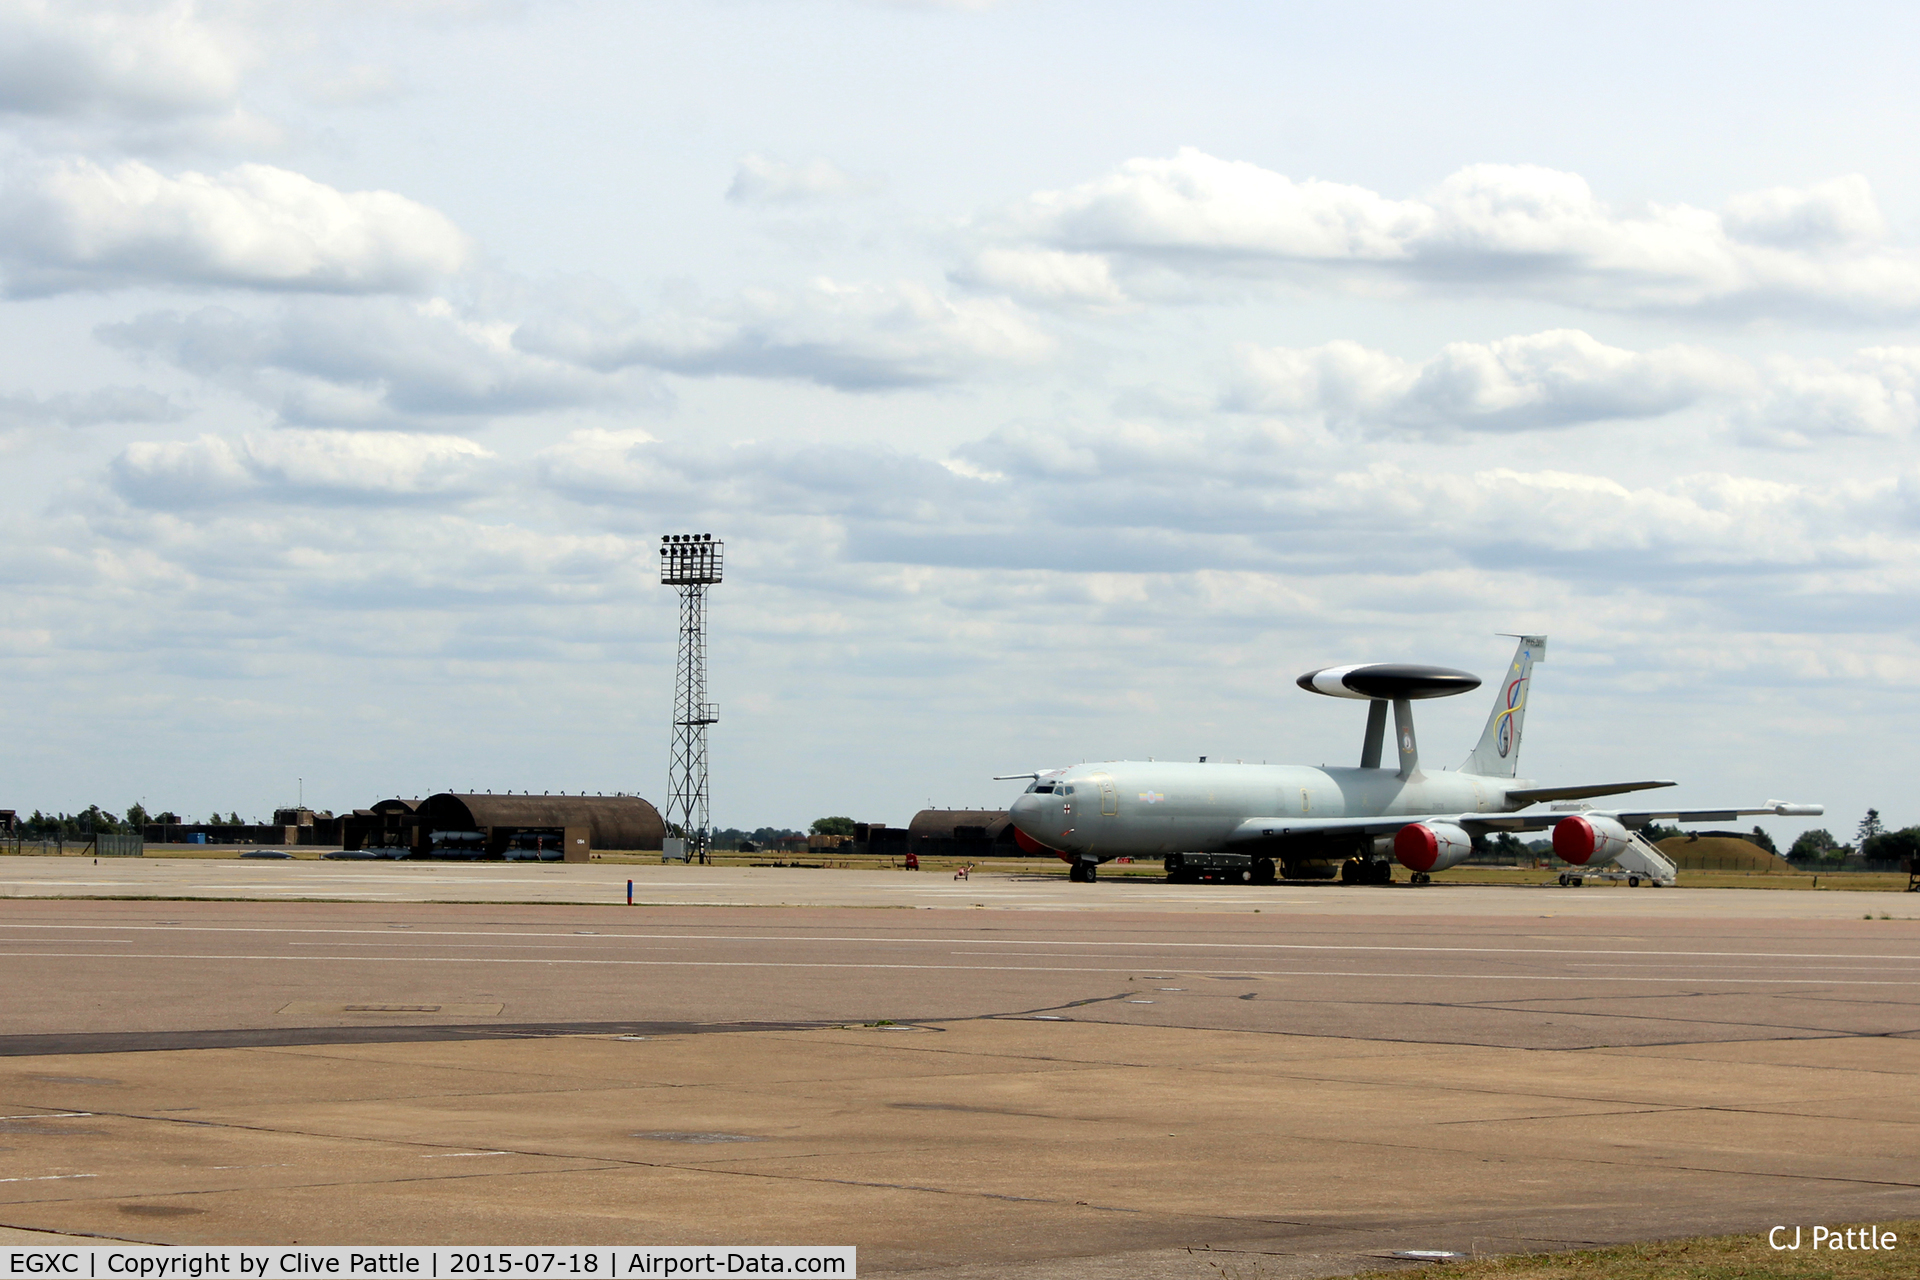 RAF Coningsby Airport, Coningsby, England United Kingdom (EGXC) - Apron view at RAF Coningsby, Lincolnshire EGXC. The parked Sentry is on temporary detachment from the nearby RAF Waddington (EGXW) whilst the latter's runway is re-surfaced.